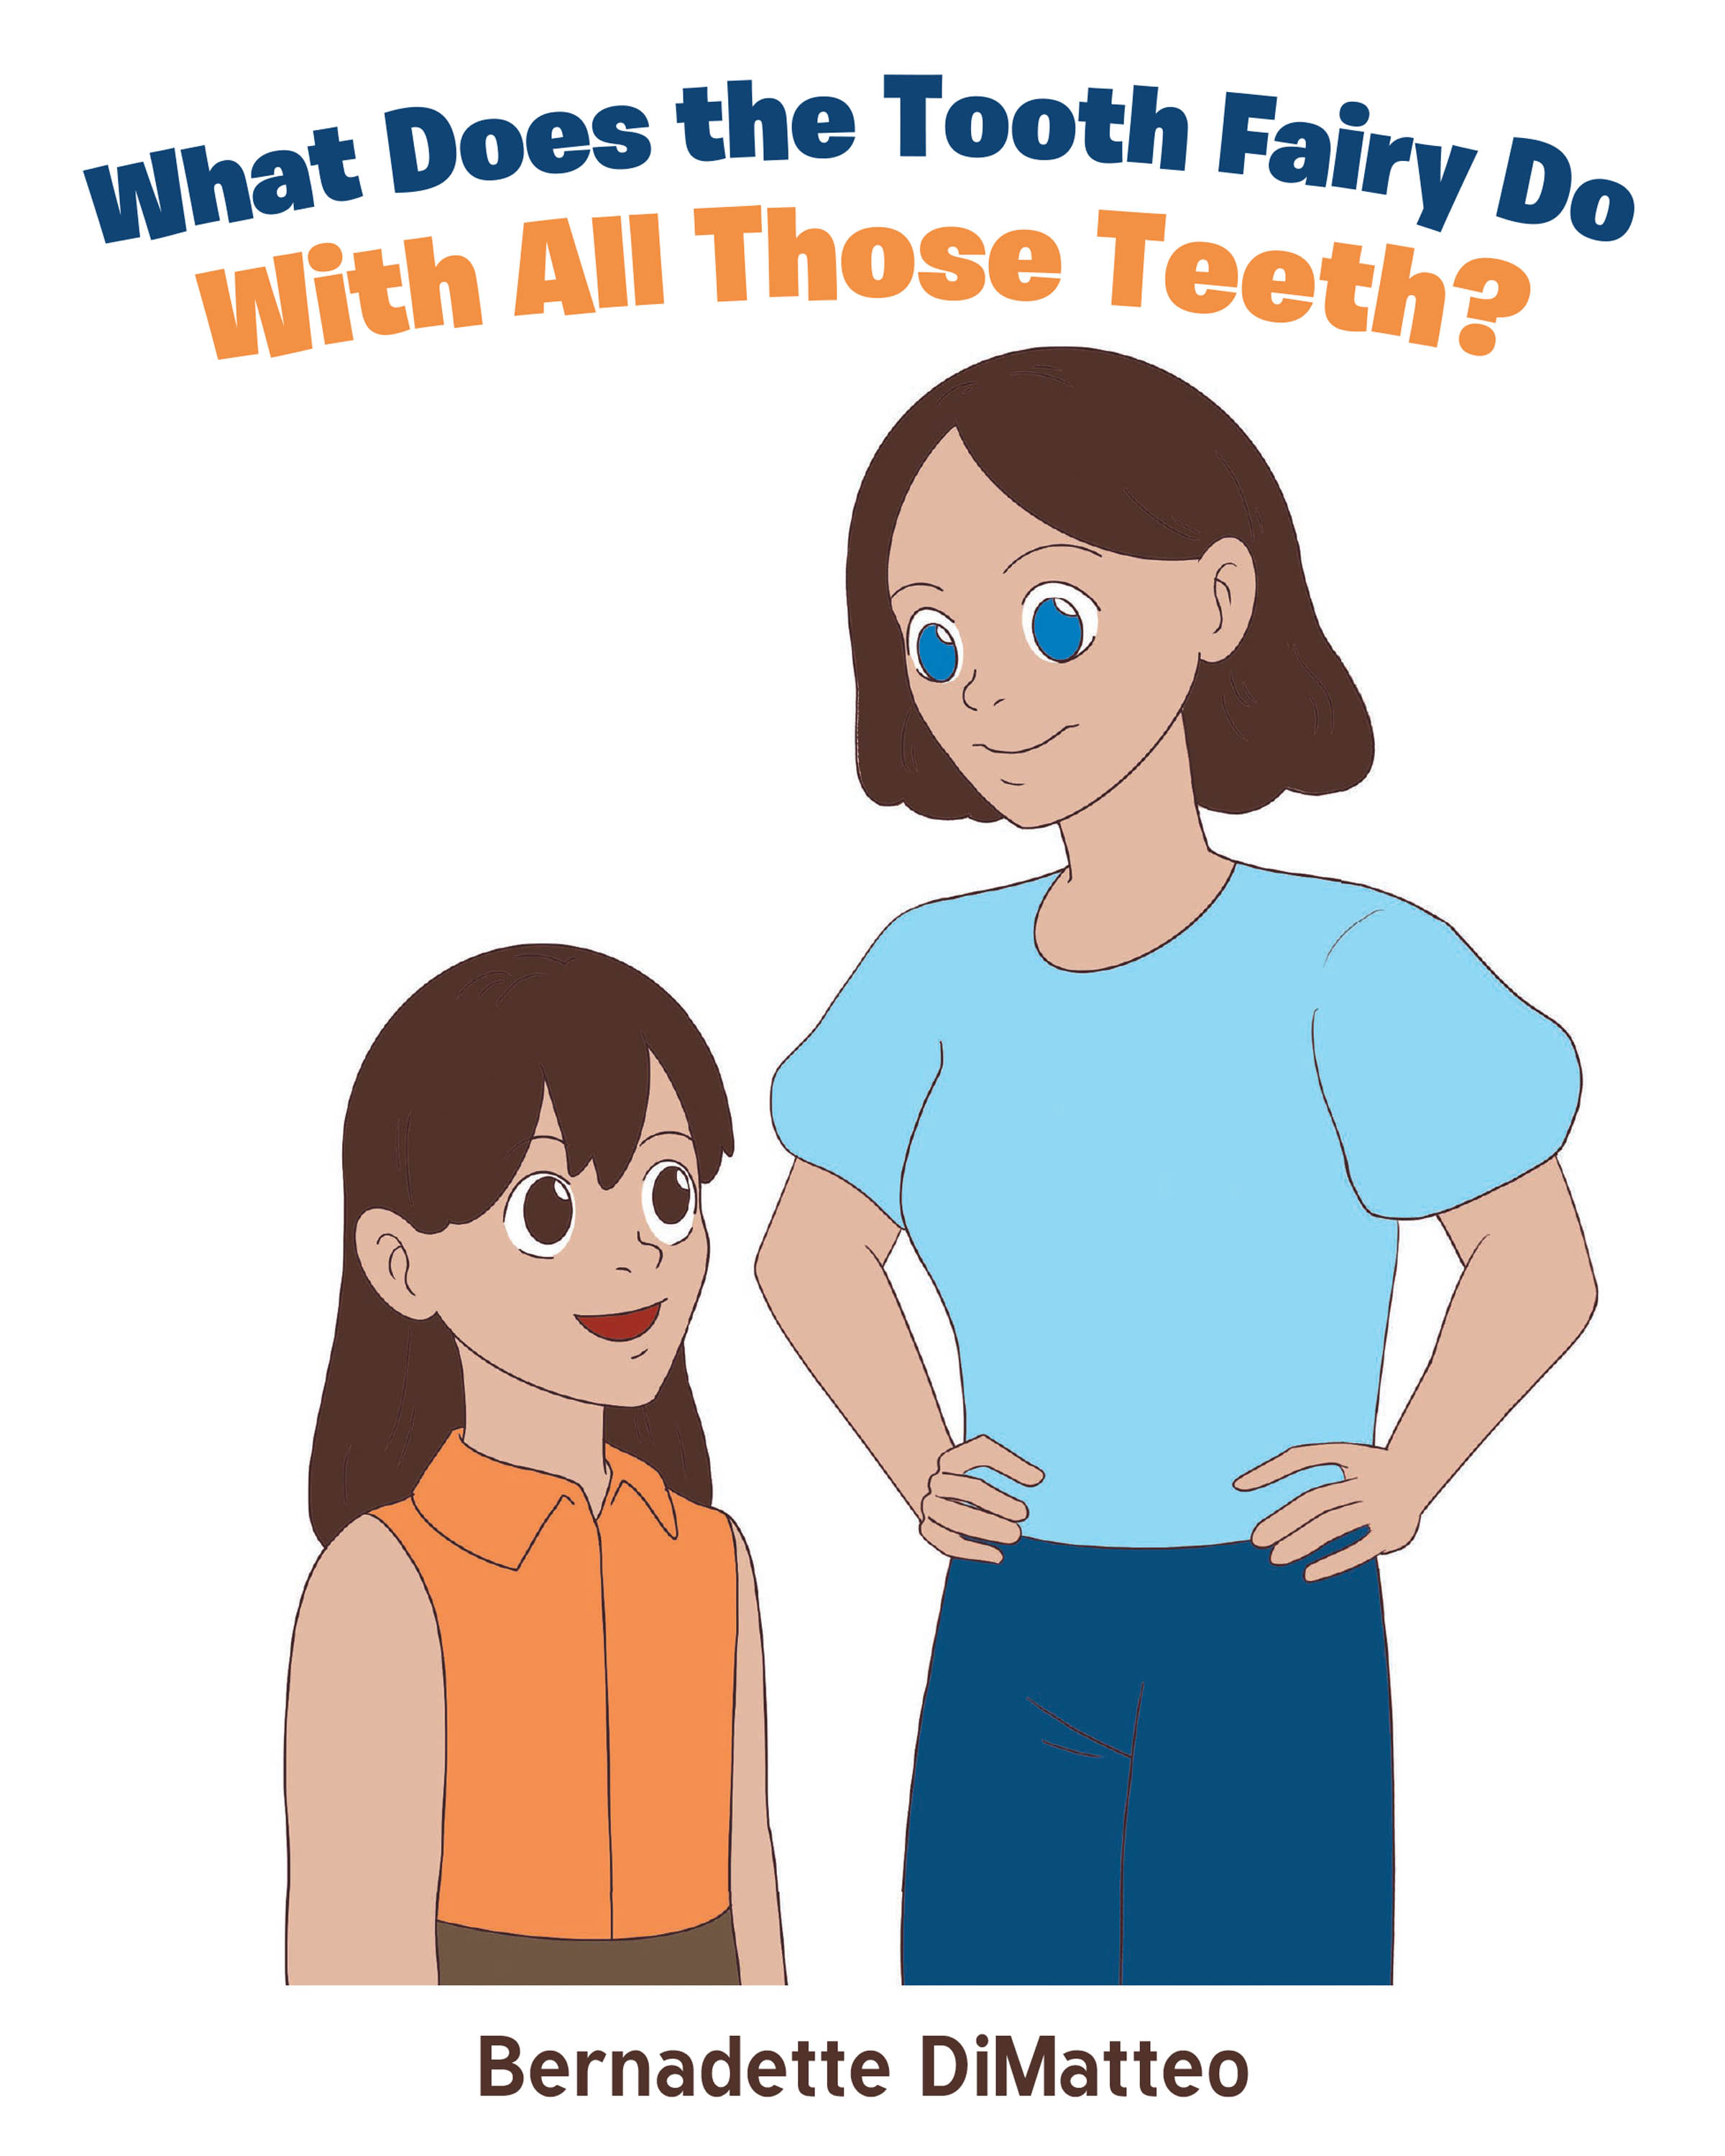 Author Bernadette DiMatteo’s New Book, "What Does the Tooth Fairy Do with All Those Teeth," is the Story of What Happens When a Little Girl Loses Her First Tooth